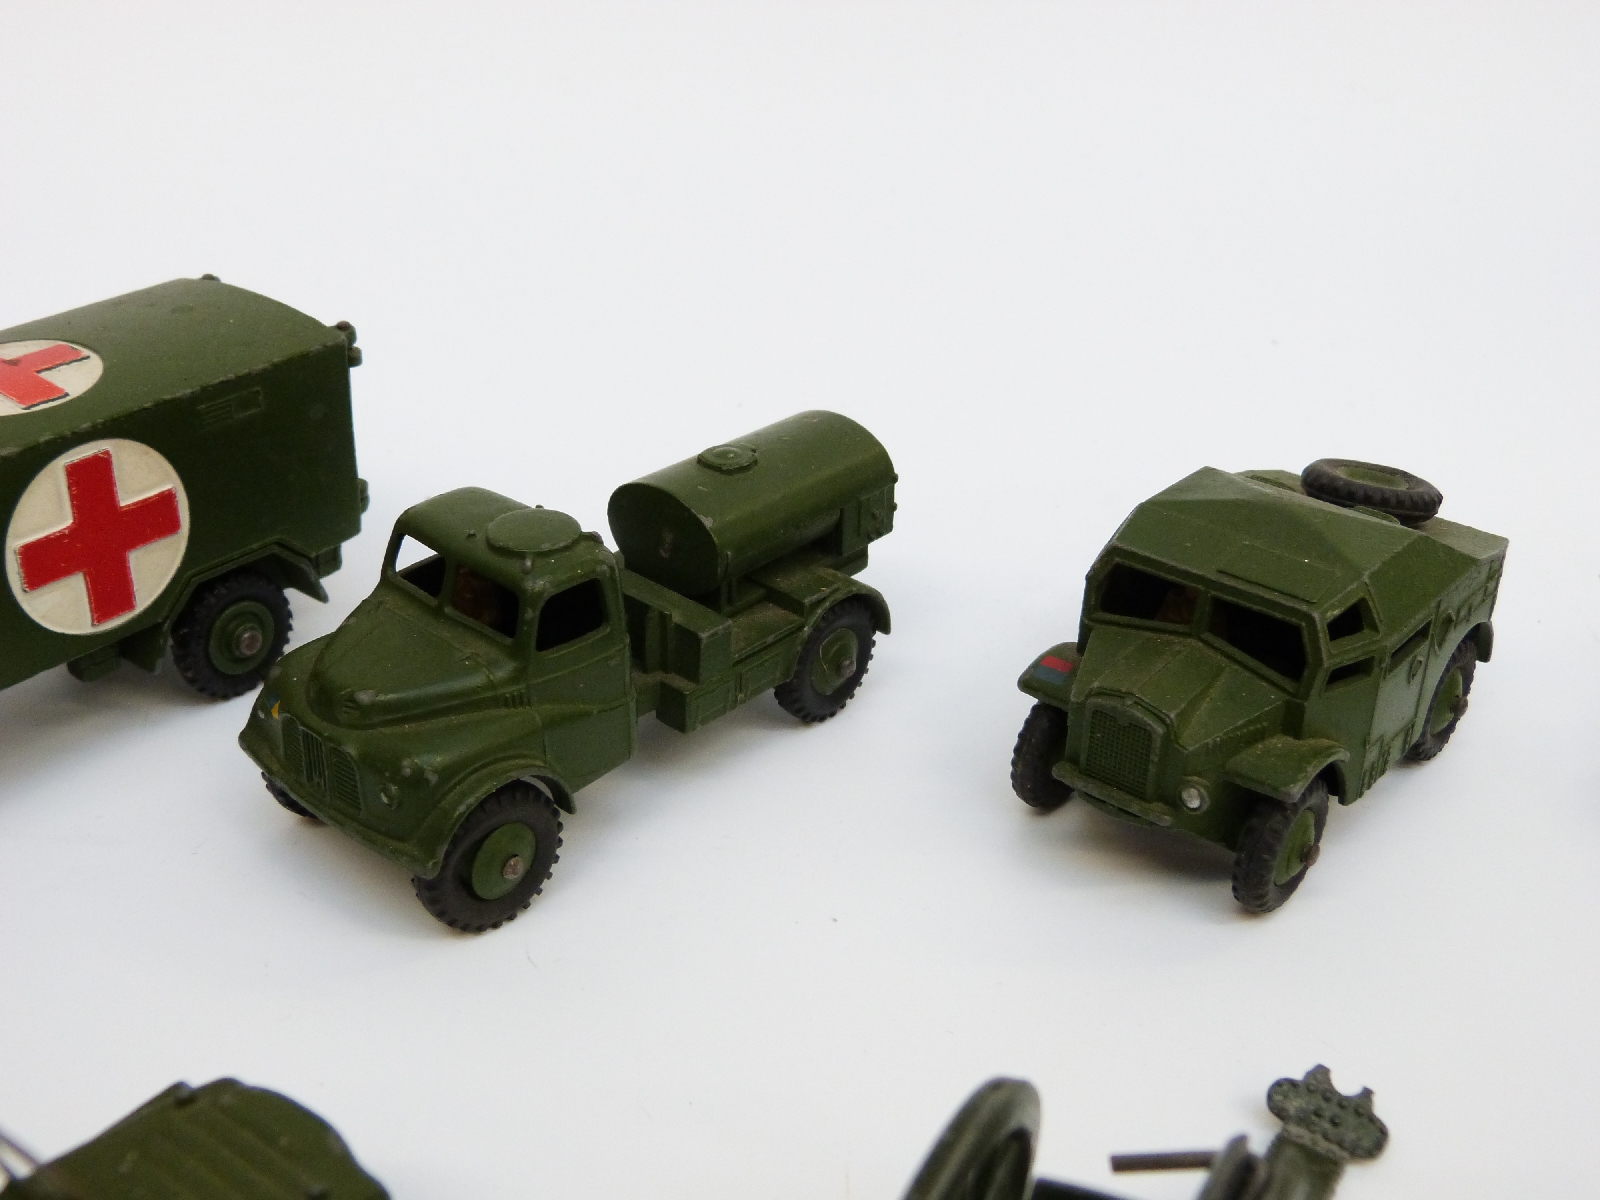 Ten Dinky Toys and Supertoys diecast model military vehicles including Military Ambulance, - Image 8 of 9